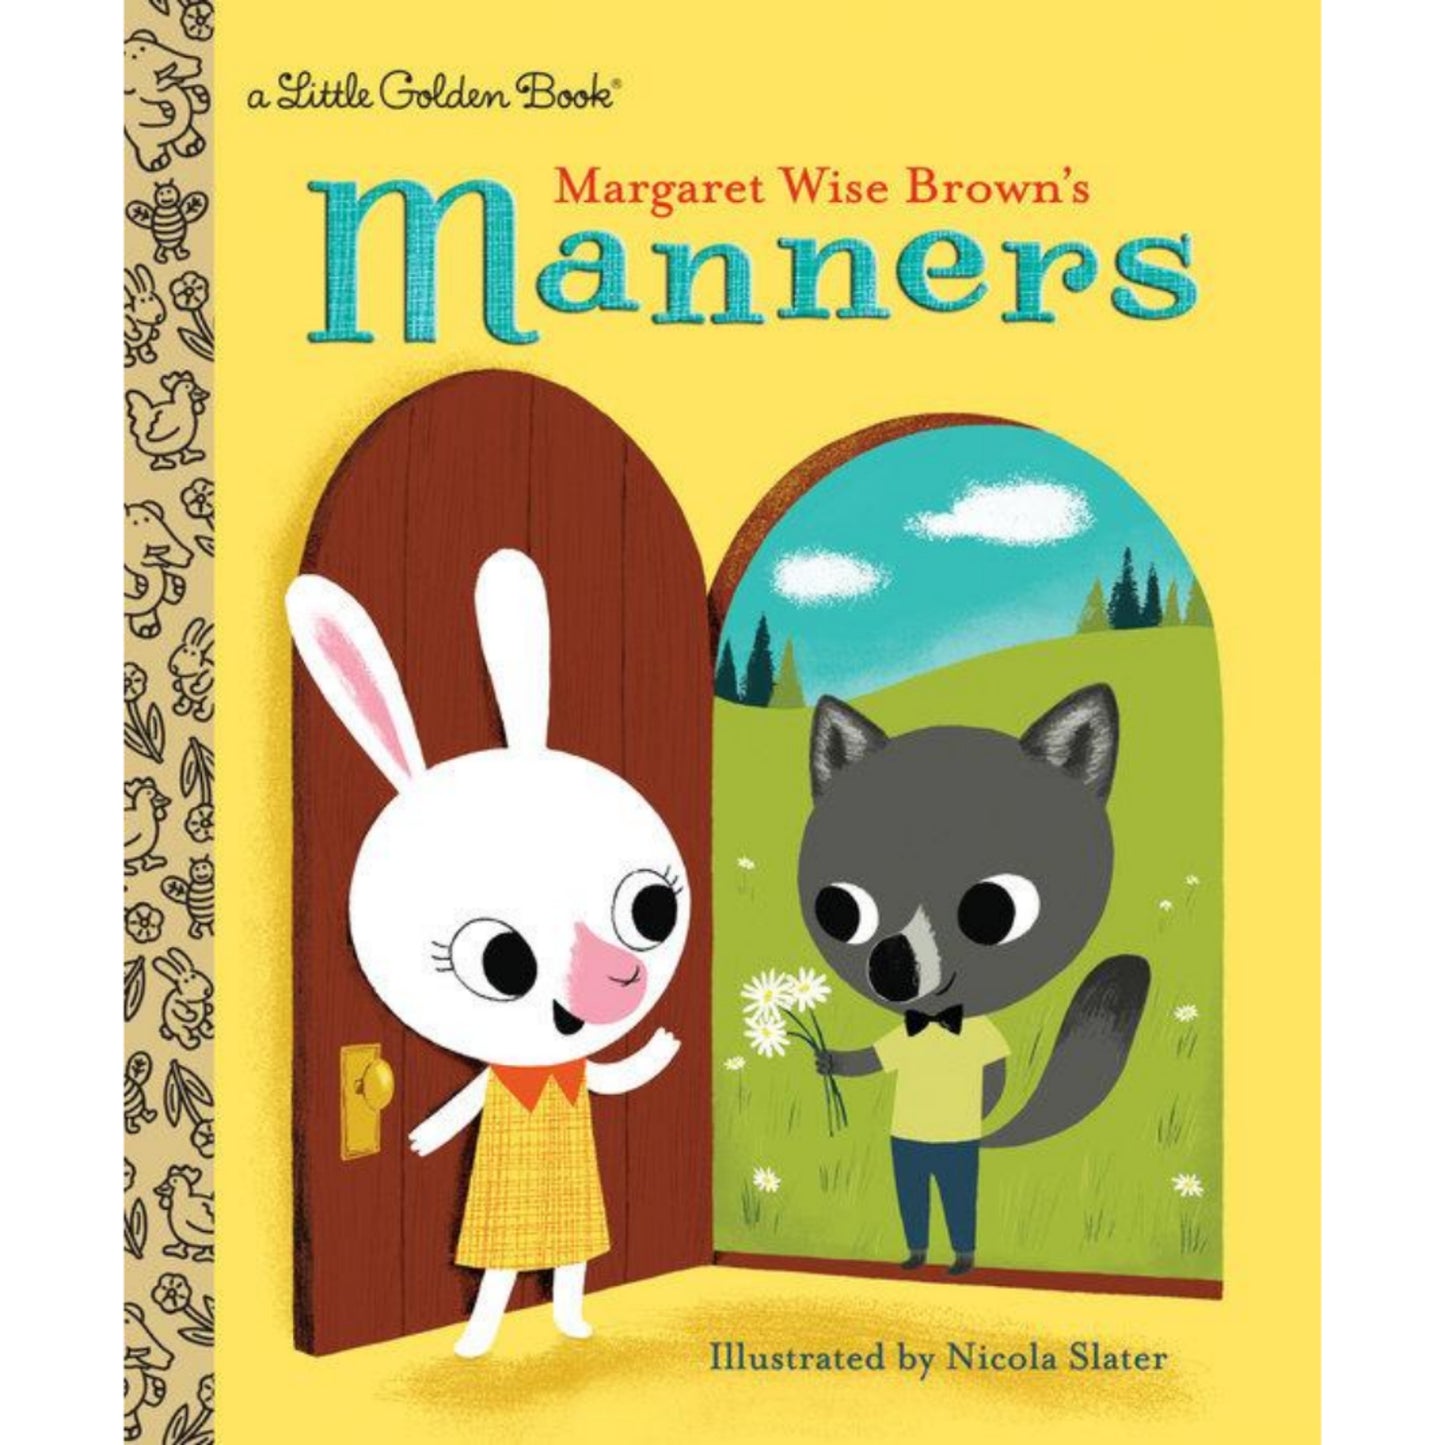 Margaret Wise Brown’s Manners